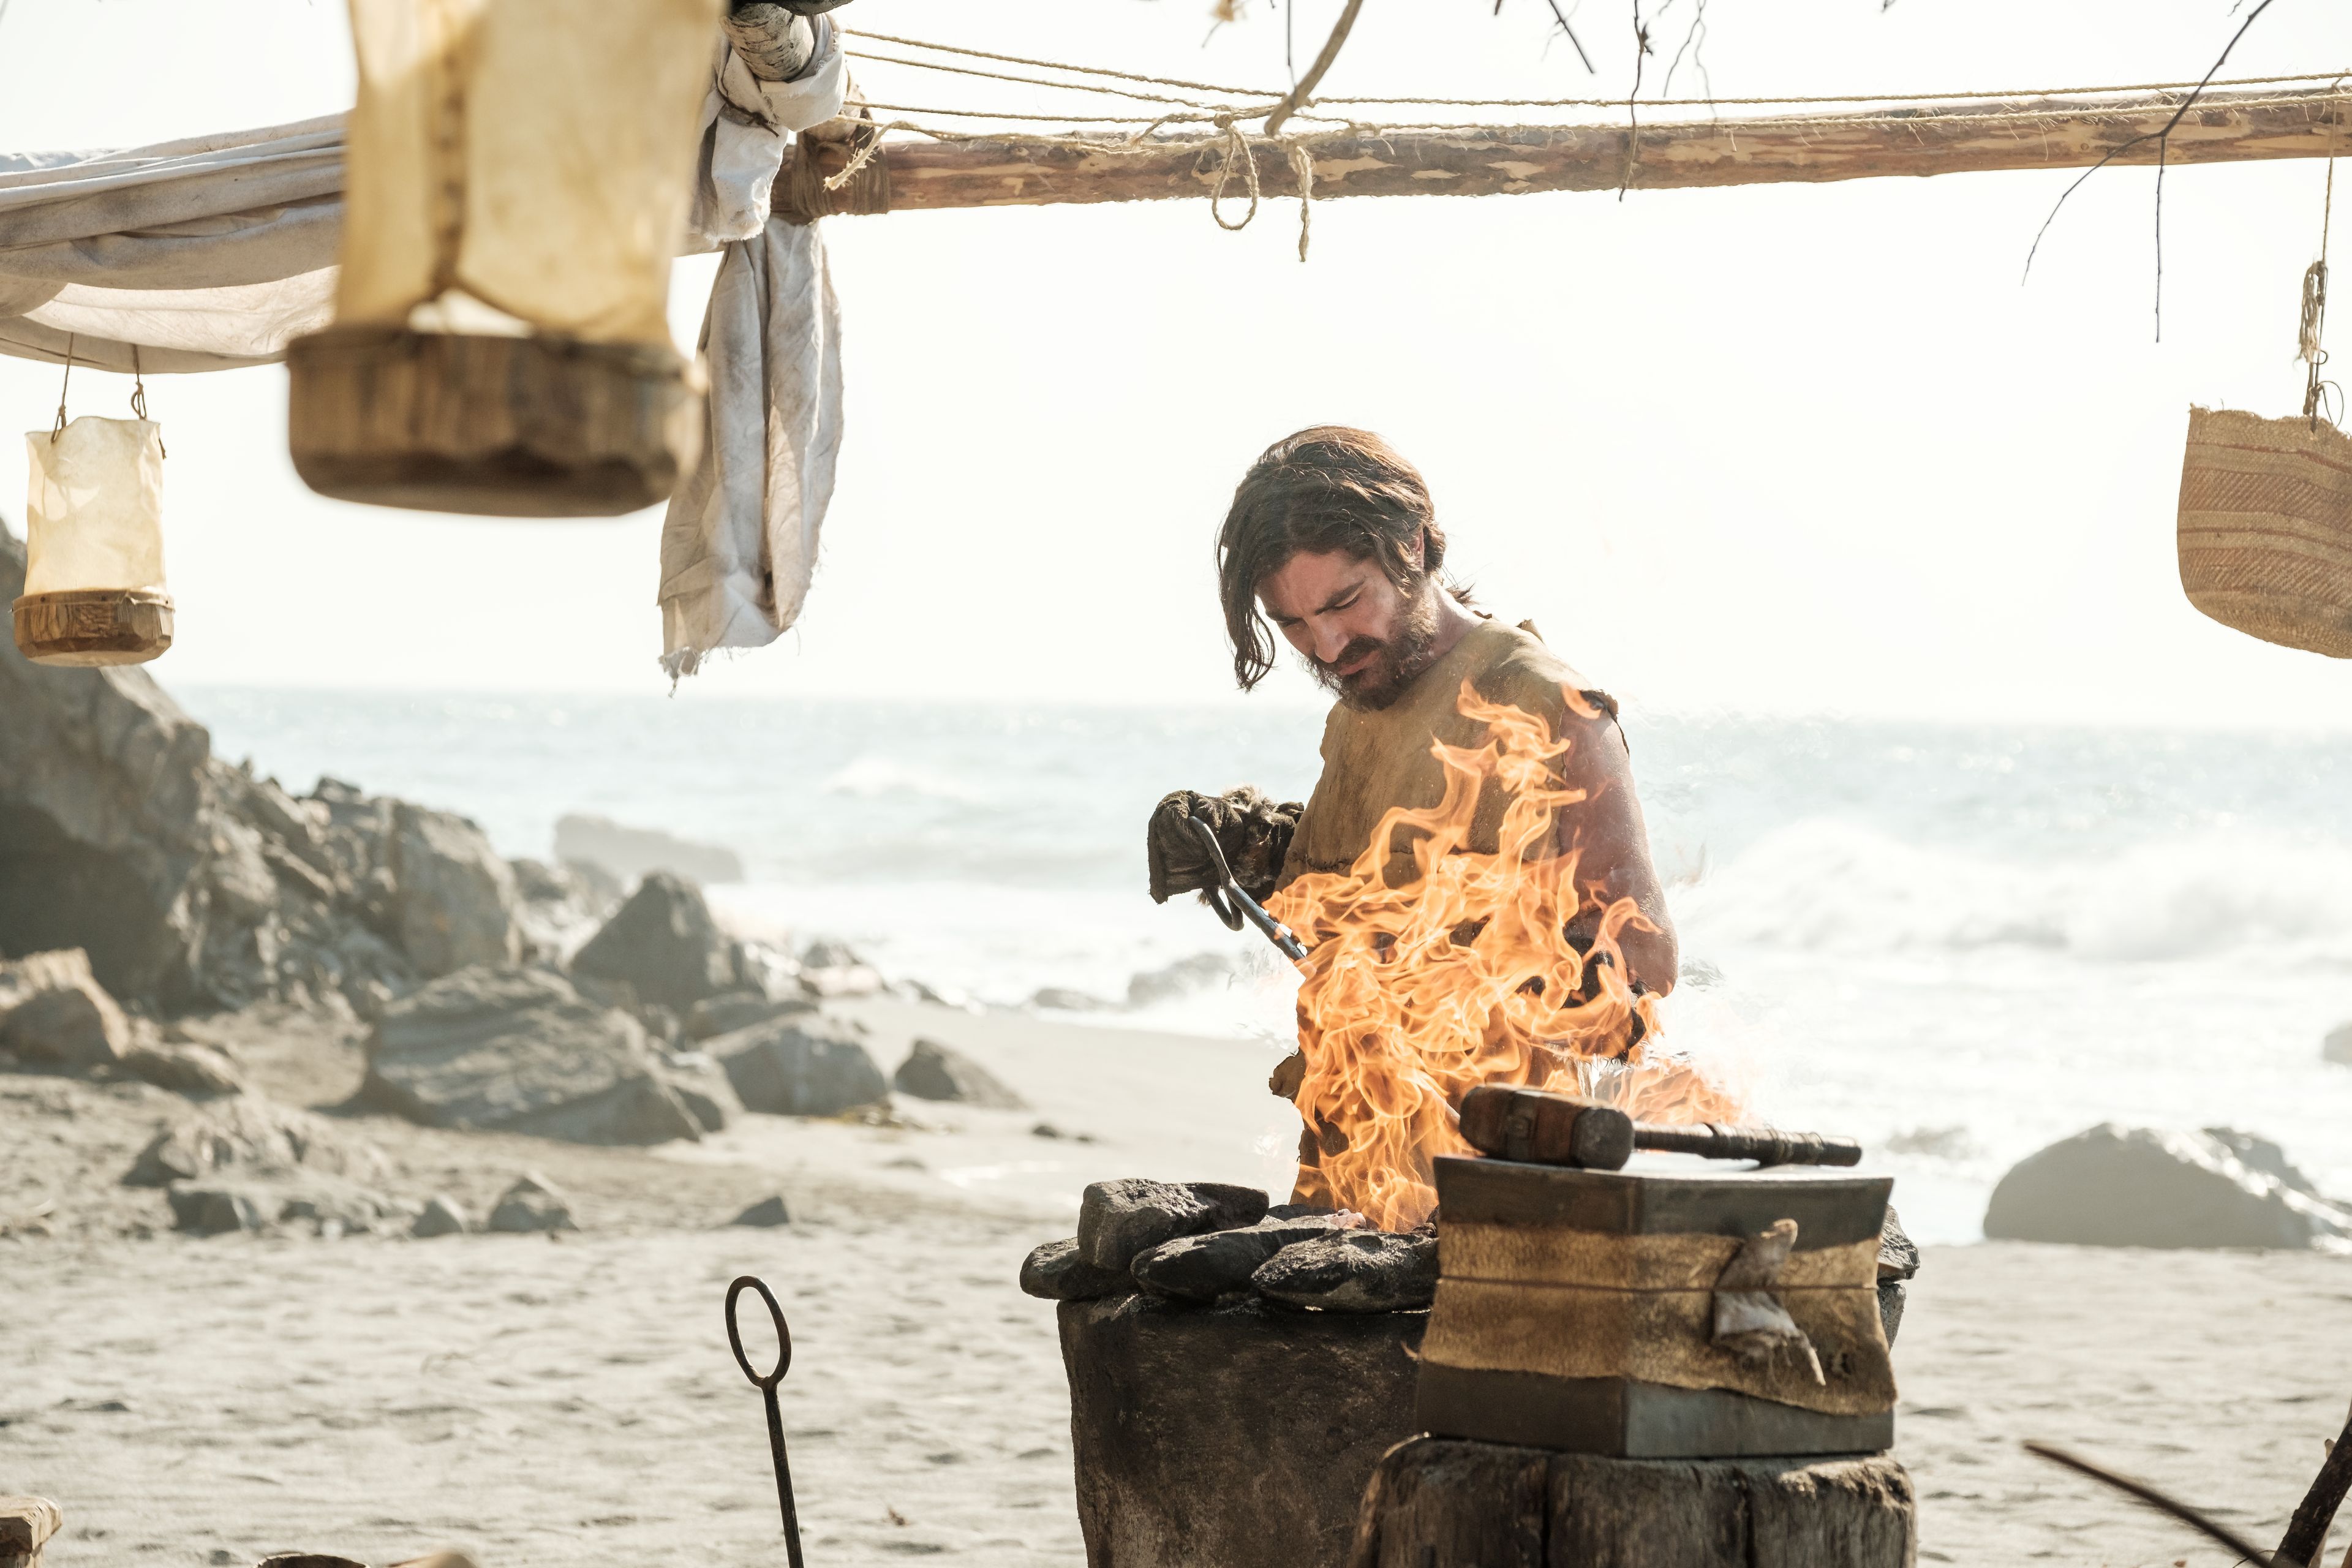 Nephi works the forge on the seashore.